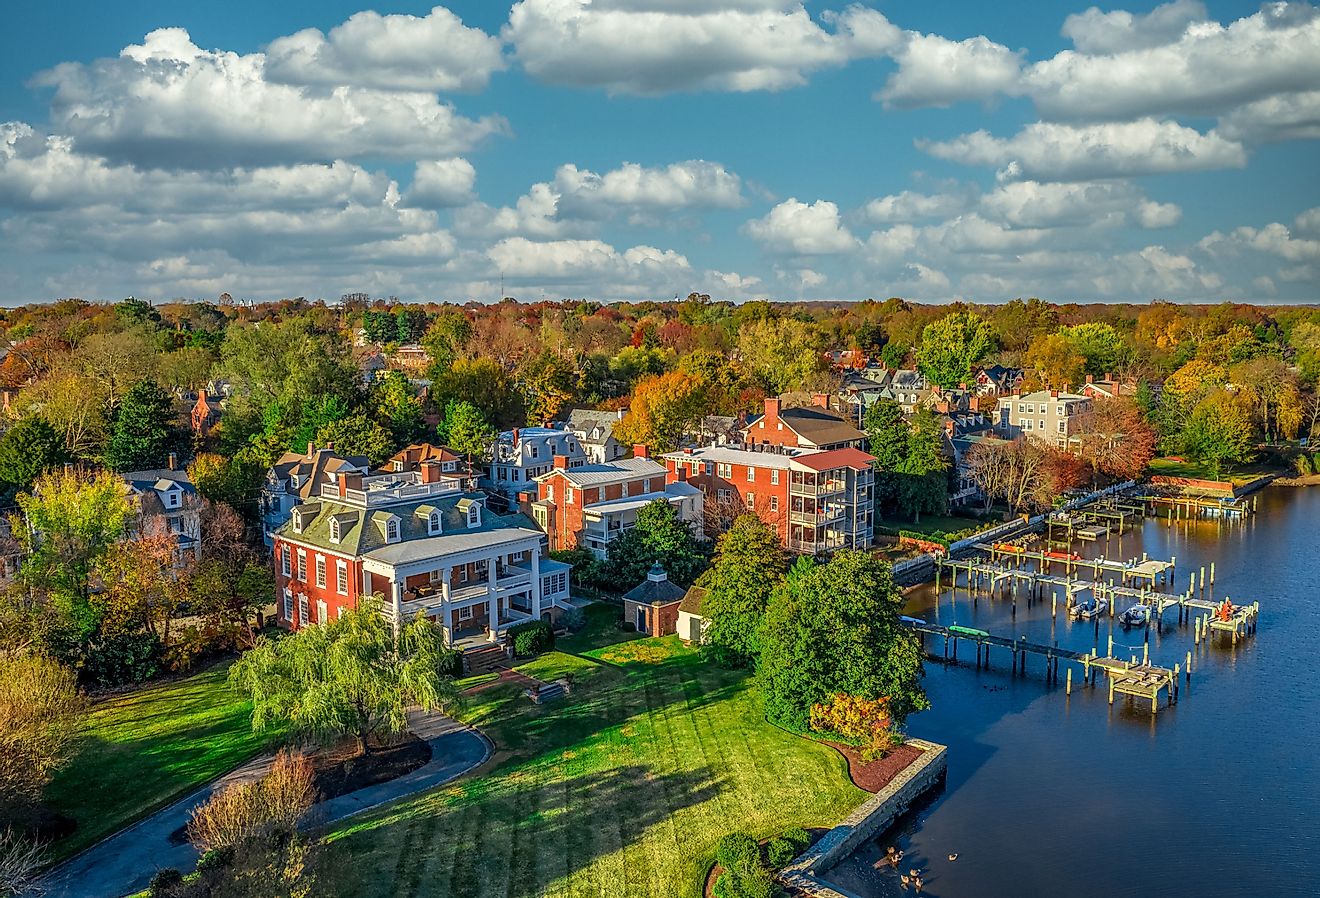 Aerial summer view of colonial Chestertown on the Chesapeake Bay in Maryland USA.